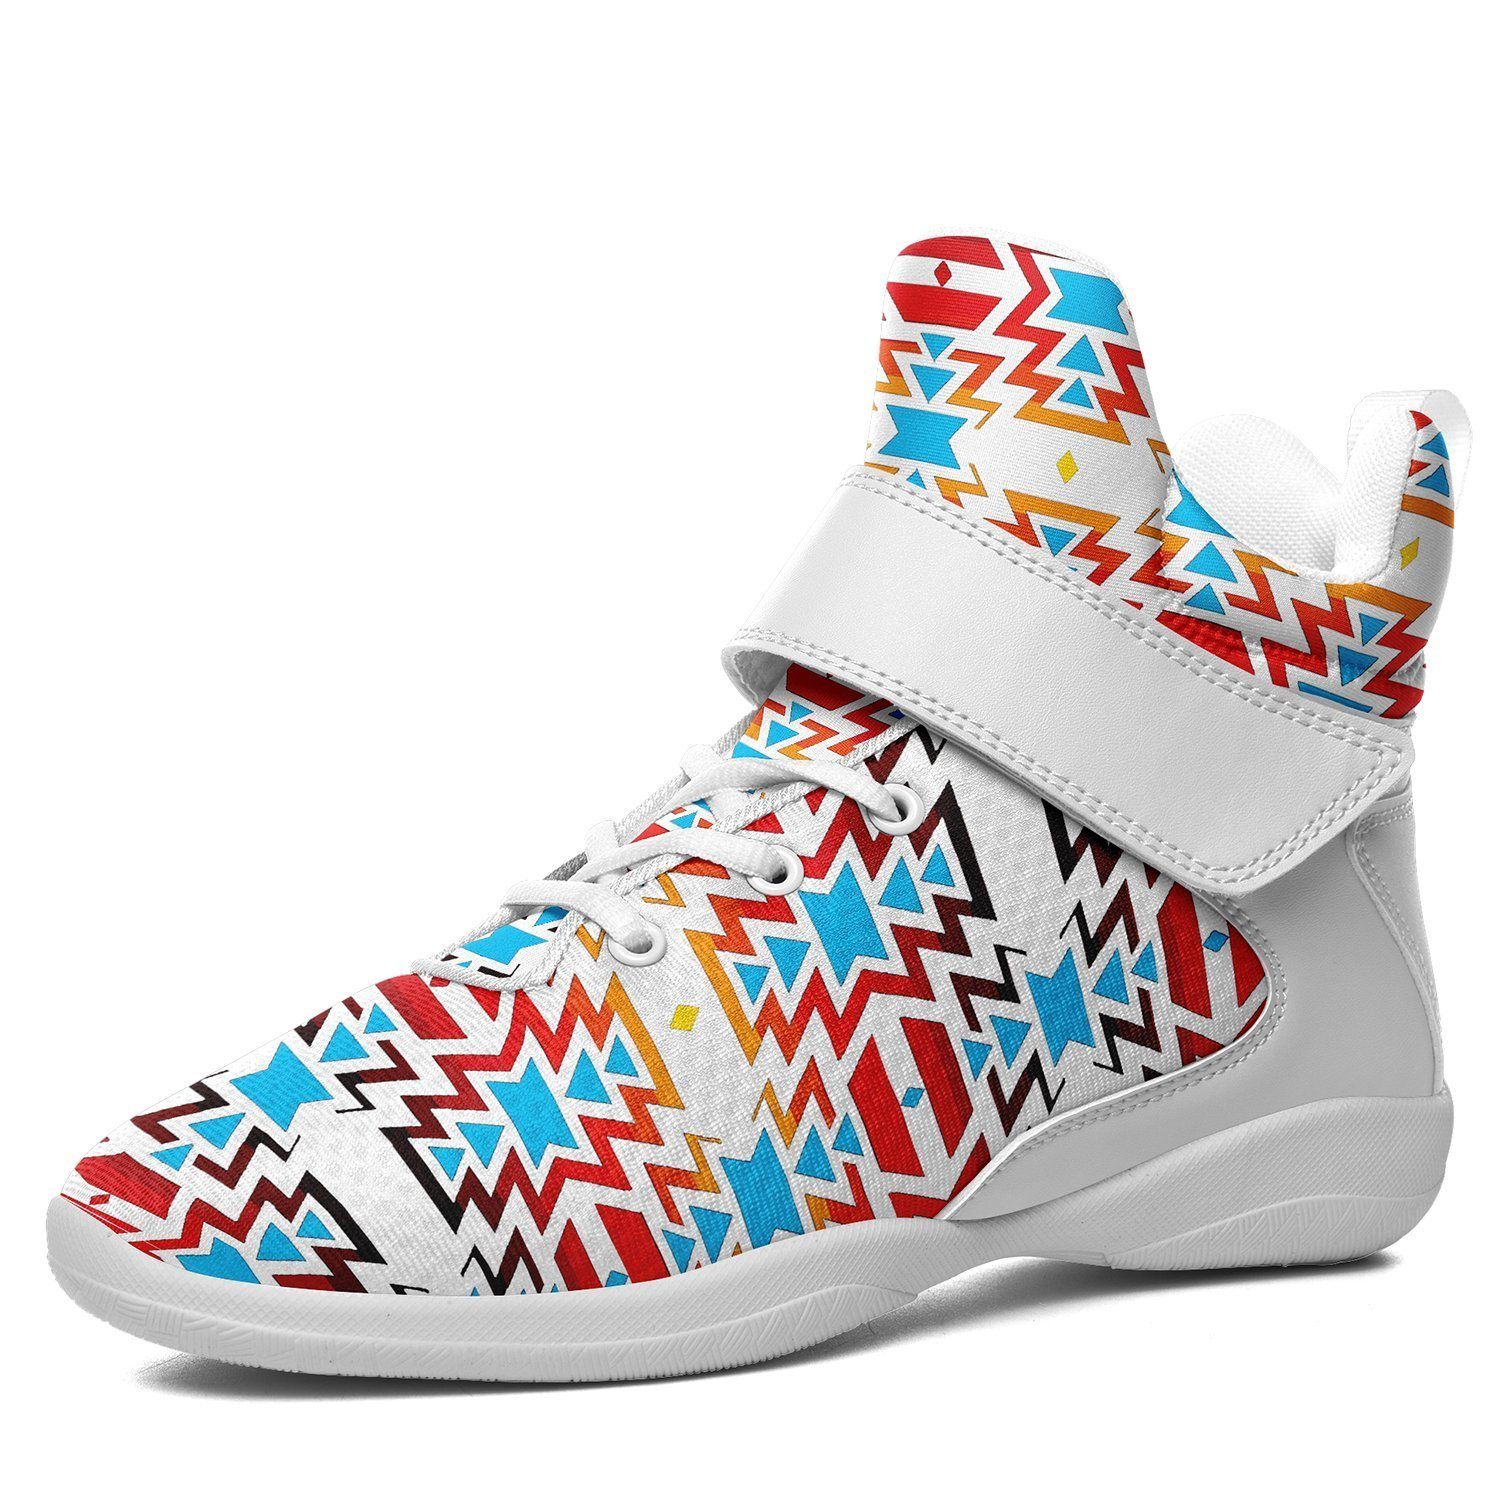 Fire Colors and Sky Kid's Ipottaa Basketball / Sport High Top Shoes 49 Dzine US Child 12.5 / EUR 30 White Sole with White Strap 